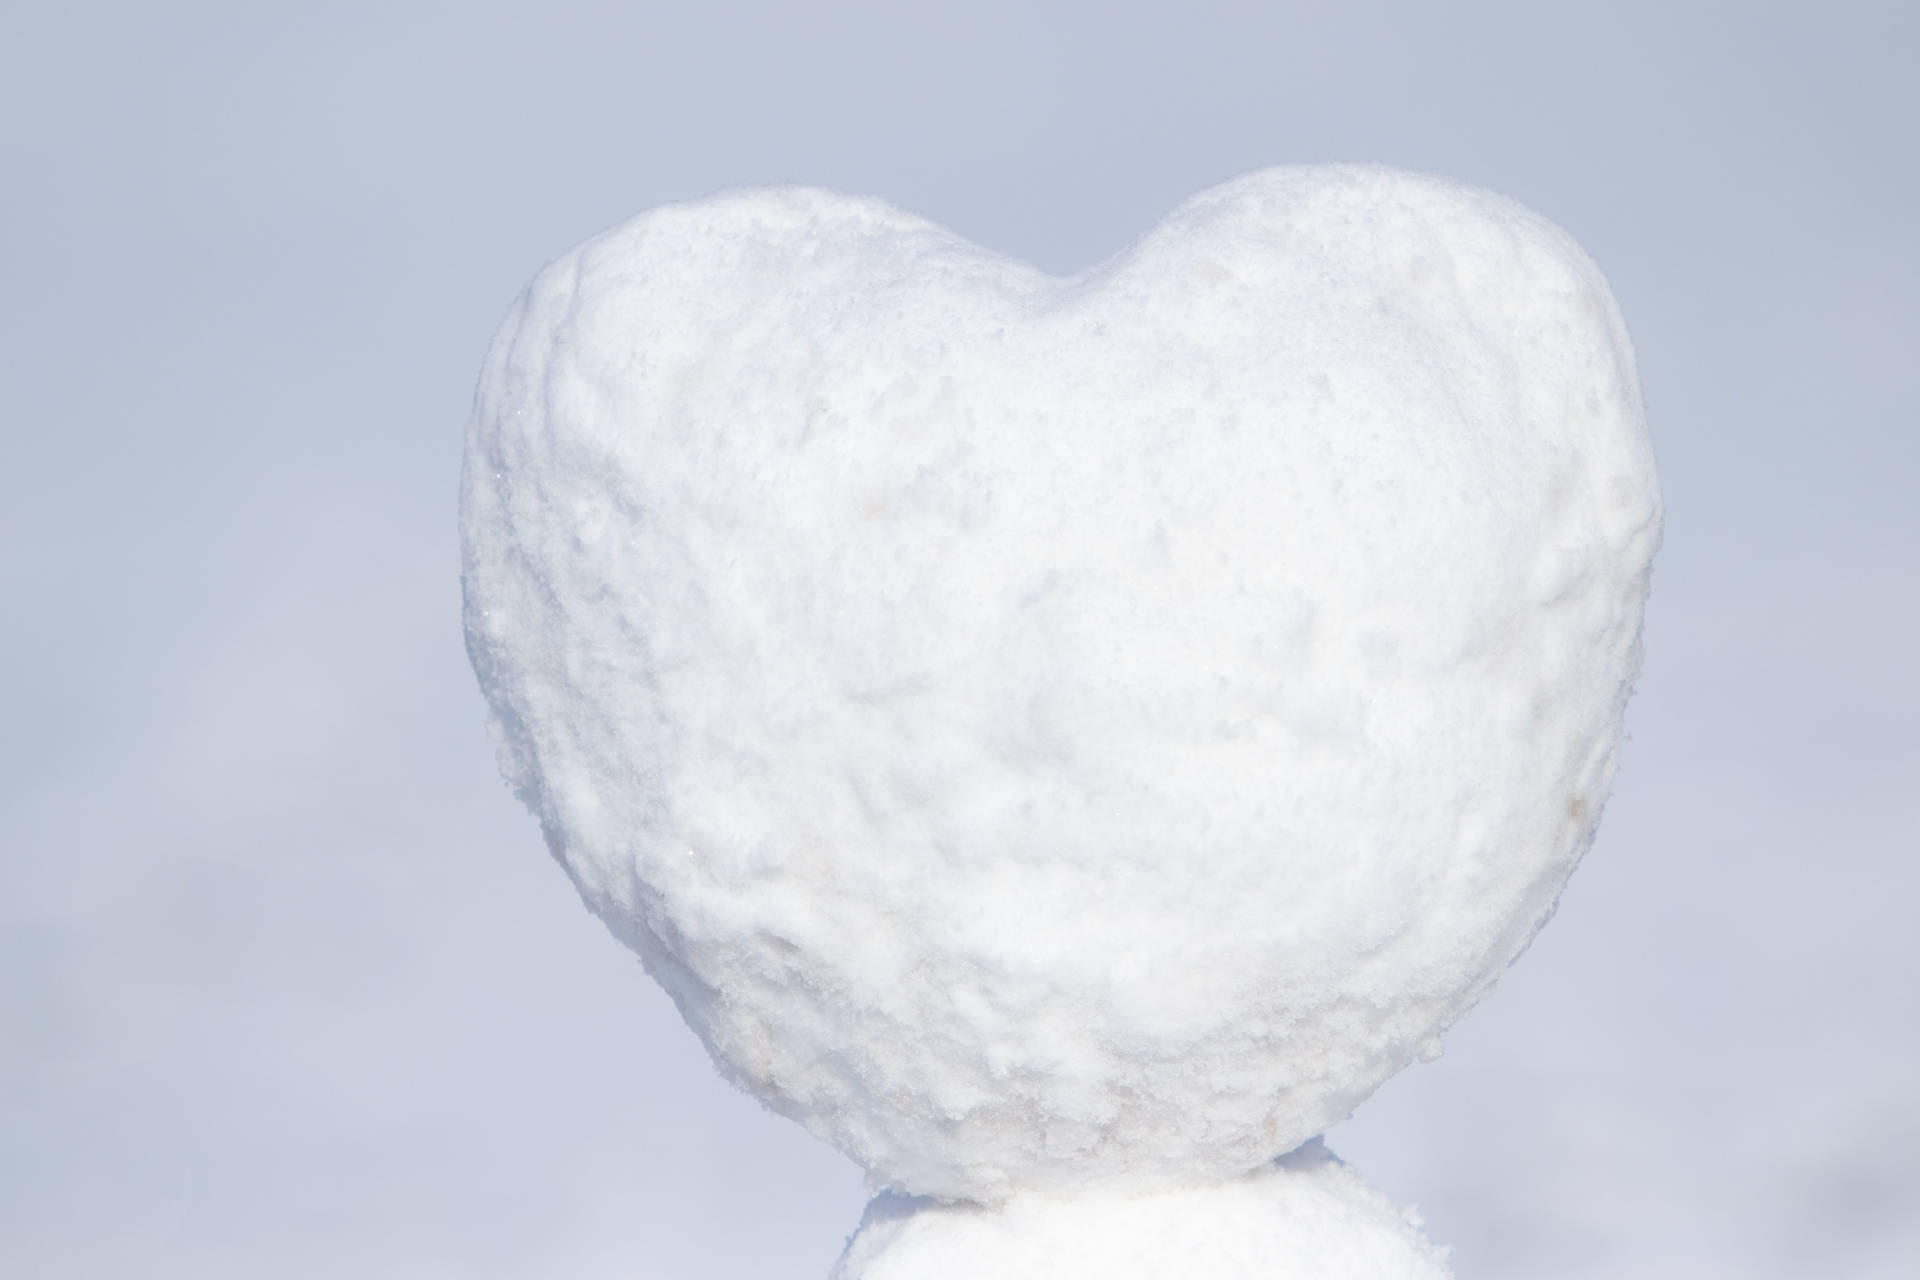 Pure White Heart-shaped Snow